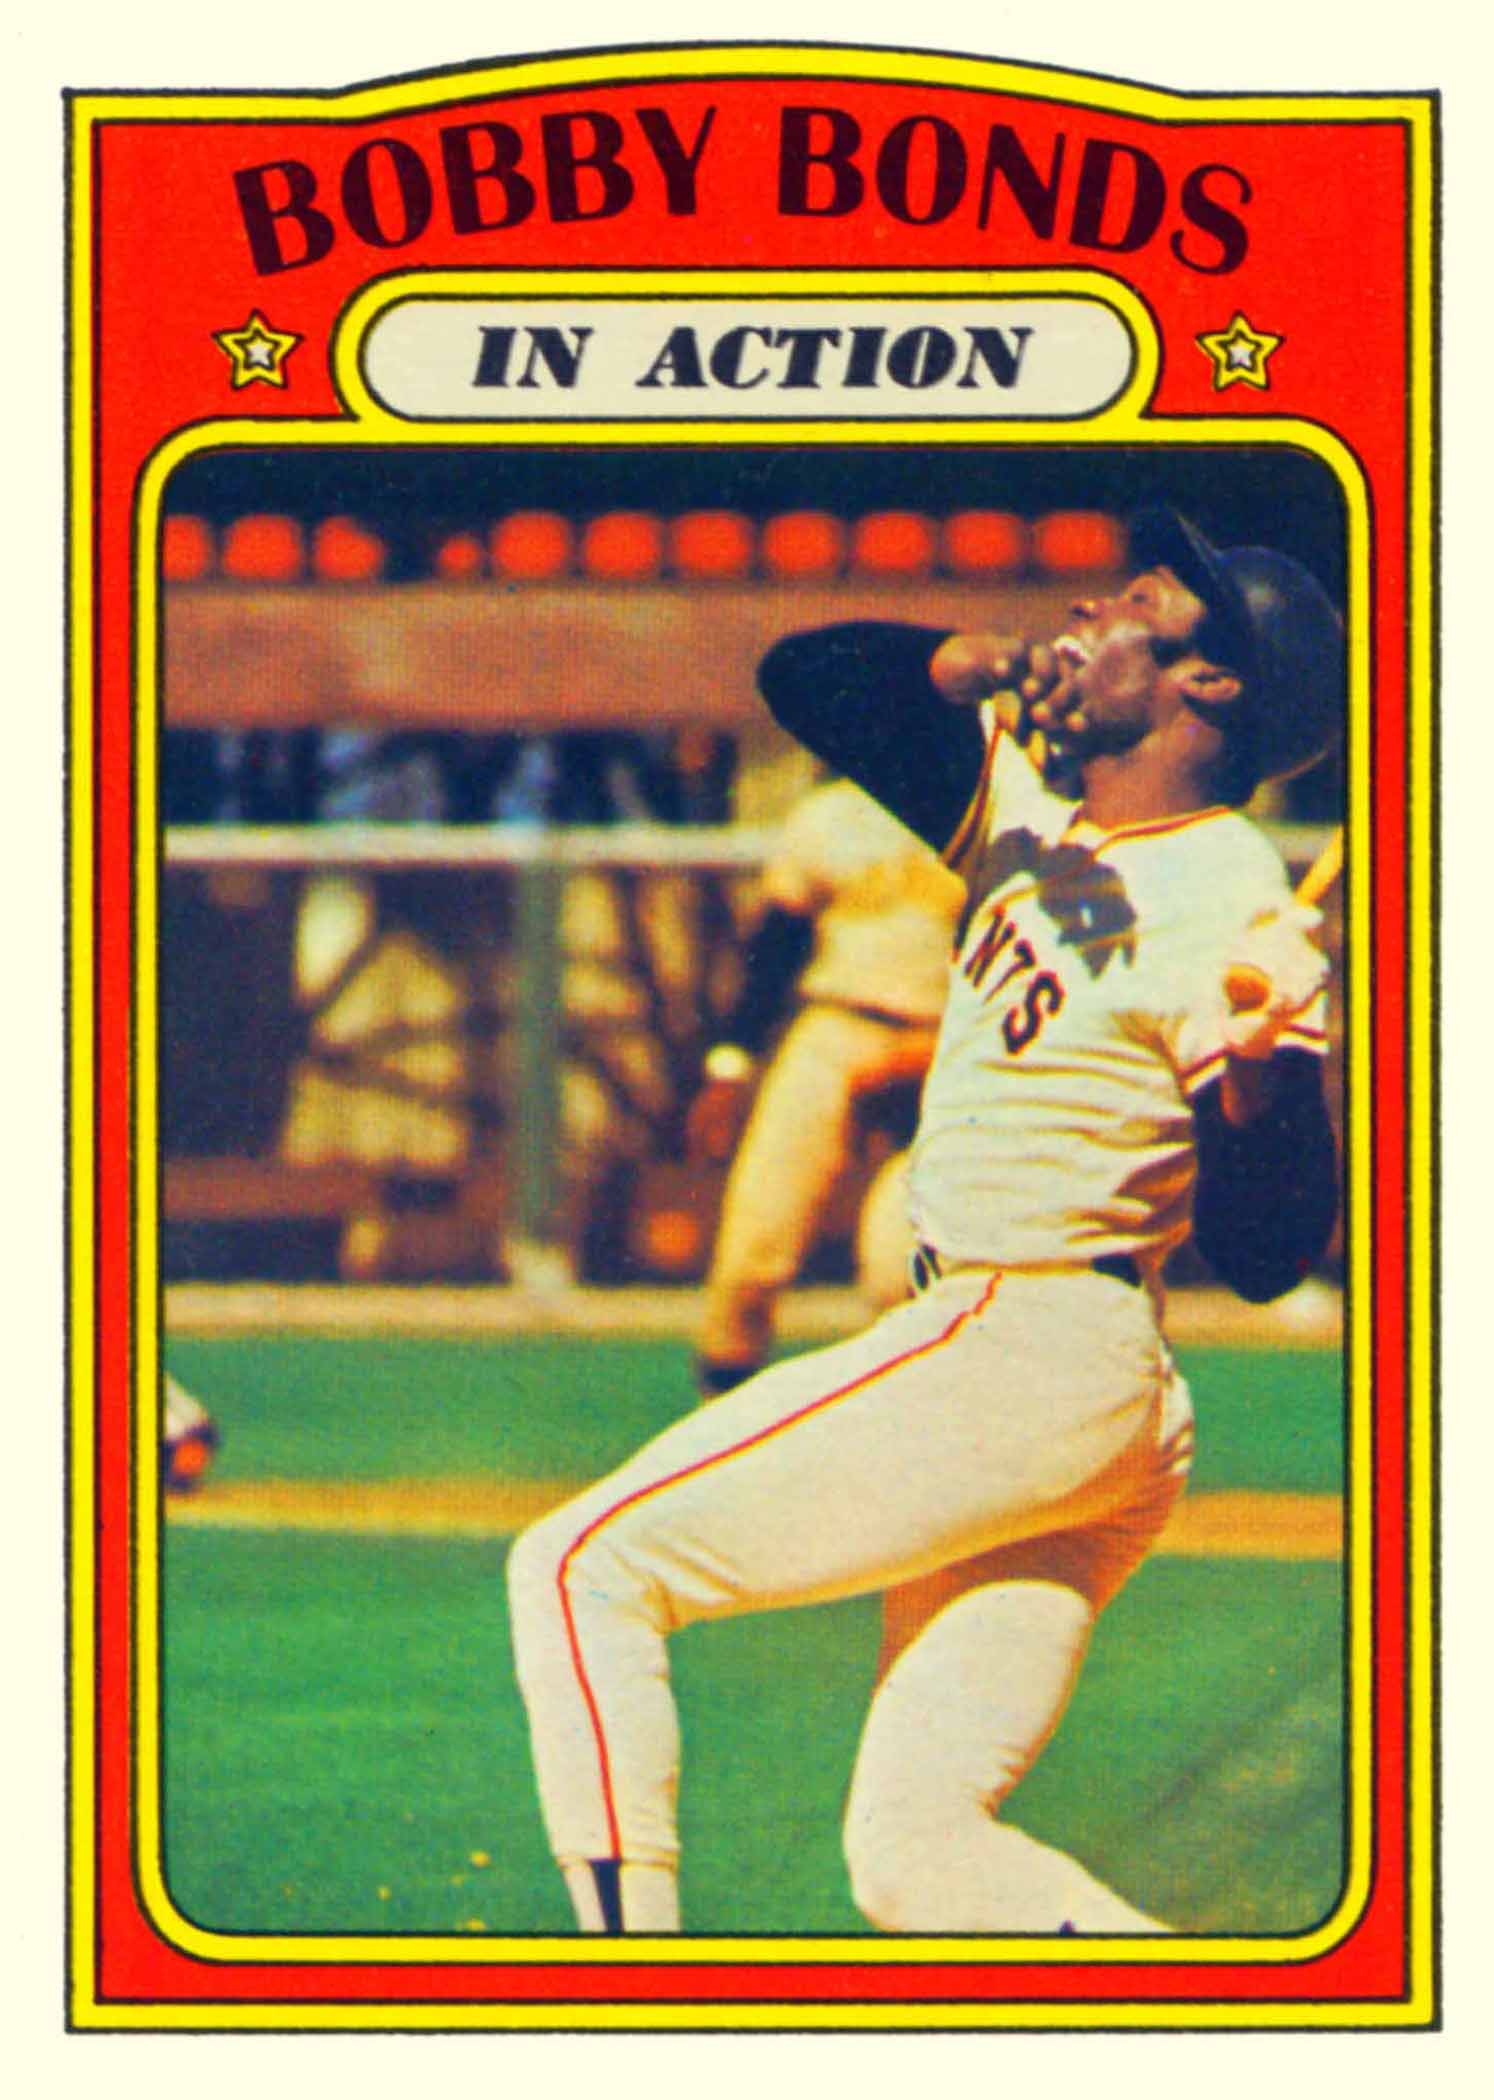 WHEN TOPPS HAD (BASE)BALLS!: 1975 IN-ACTION: BOBBY BONDS